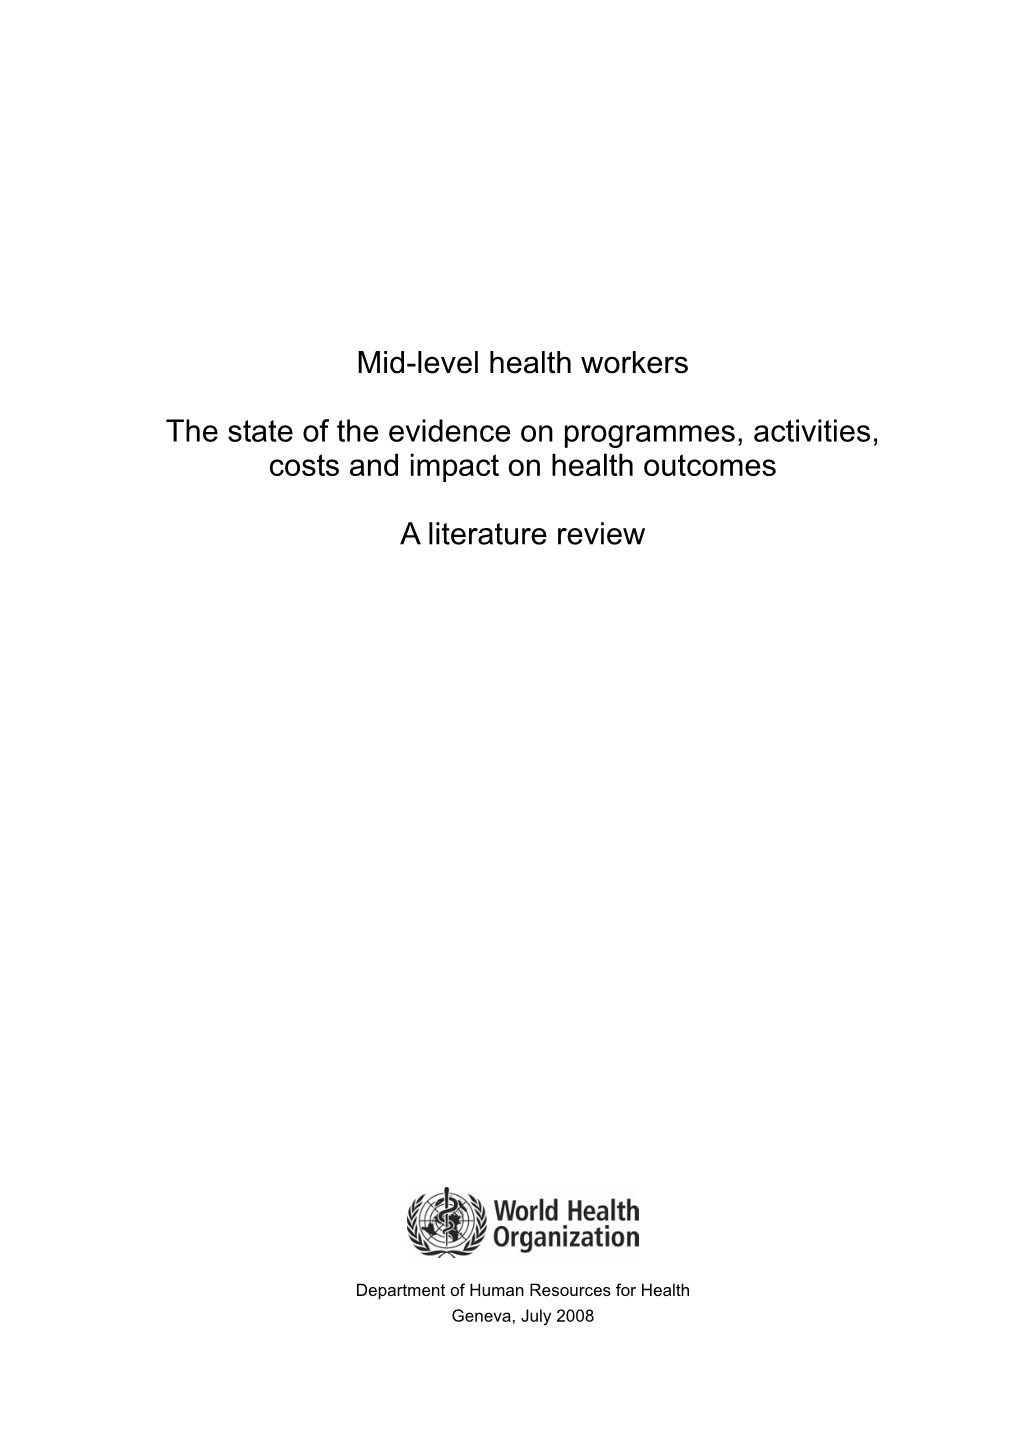 Mid-Level Health Workers the State of the Evidence on Programmes